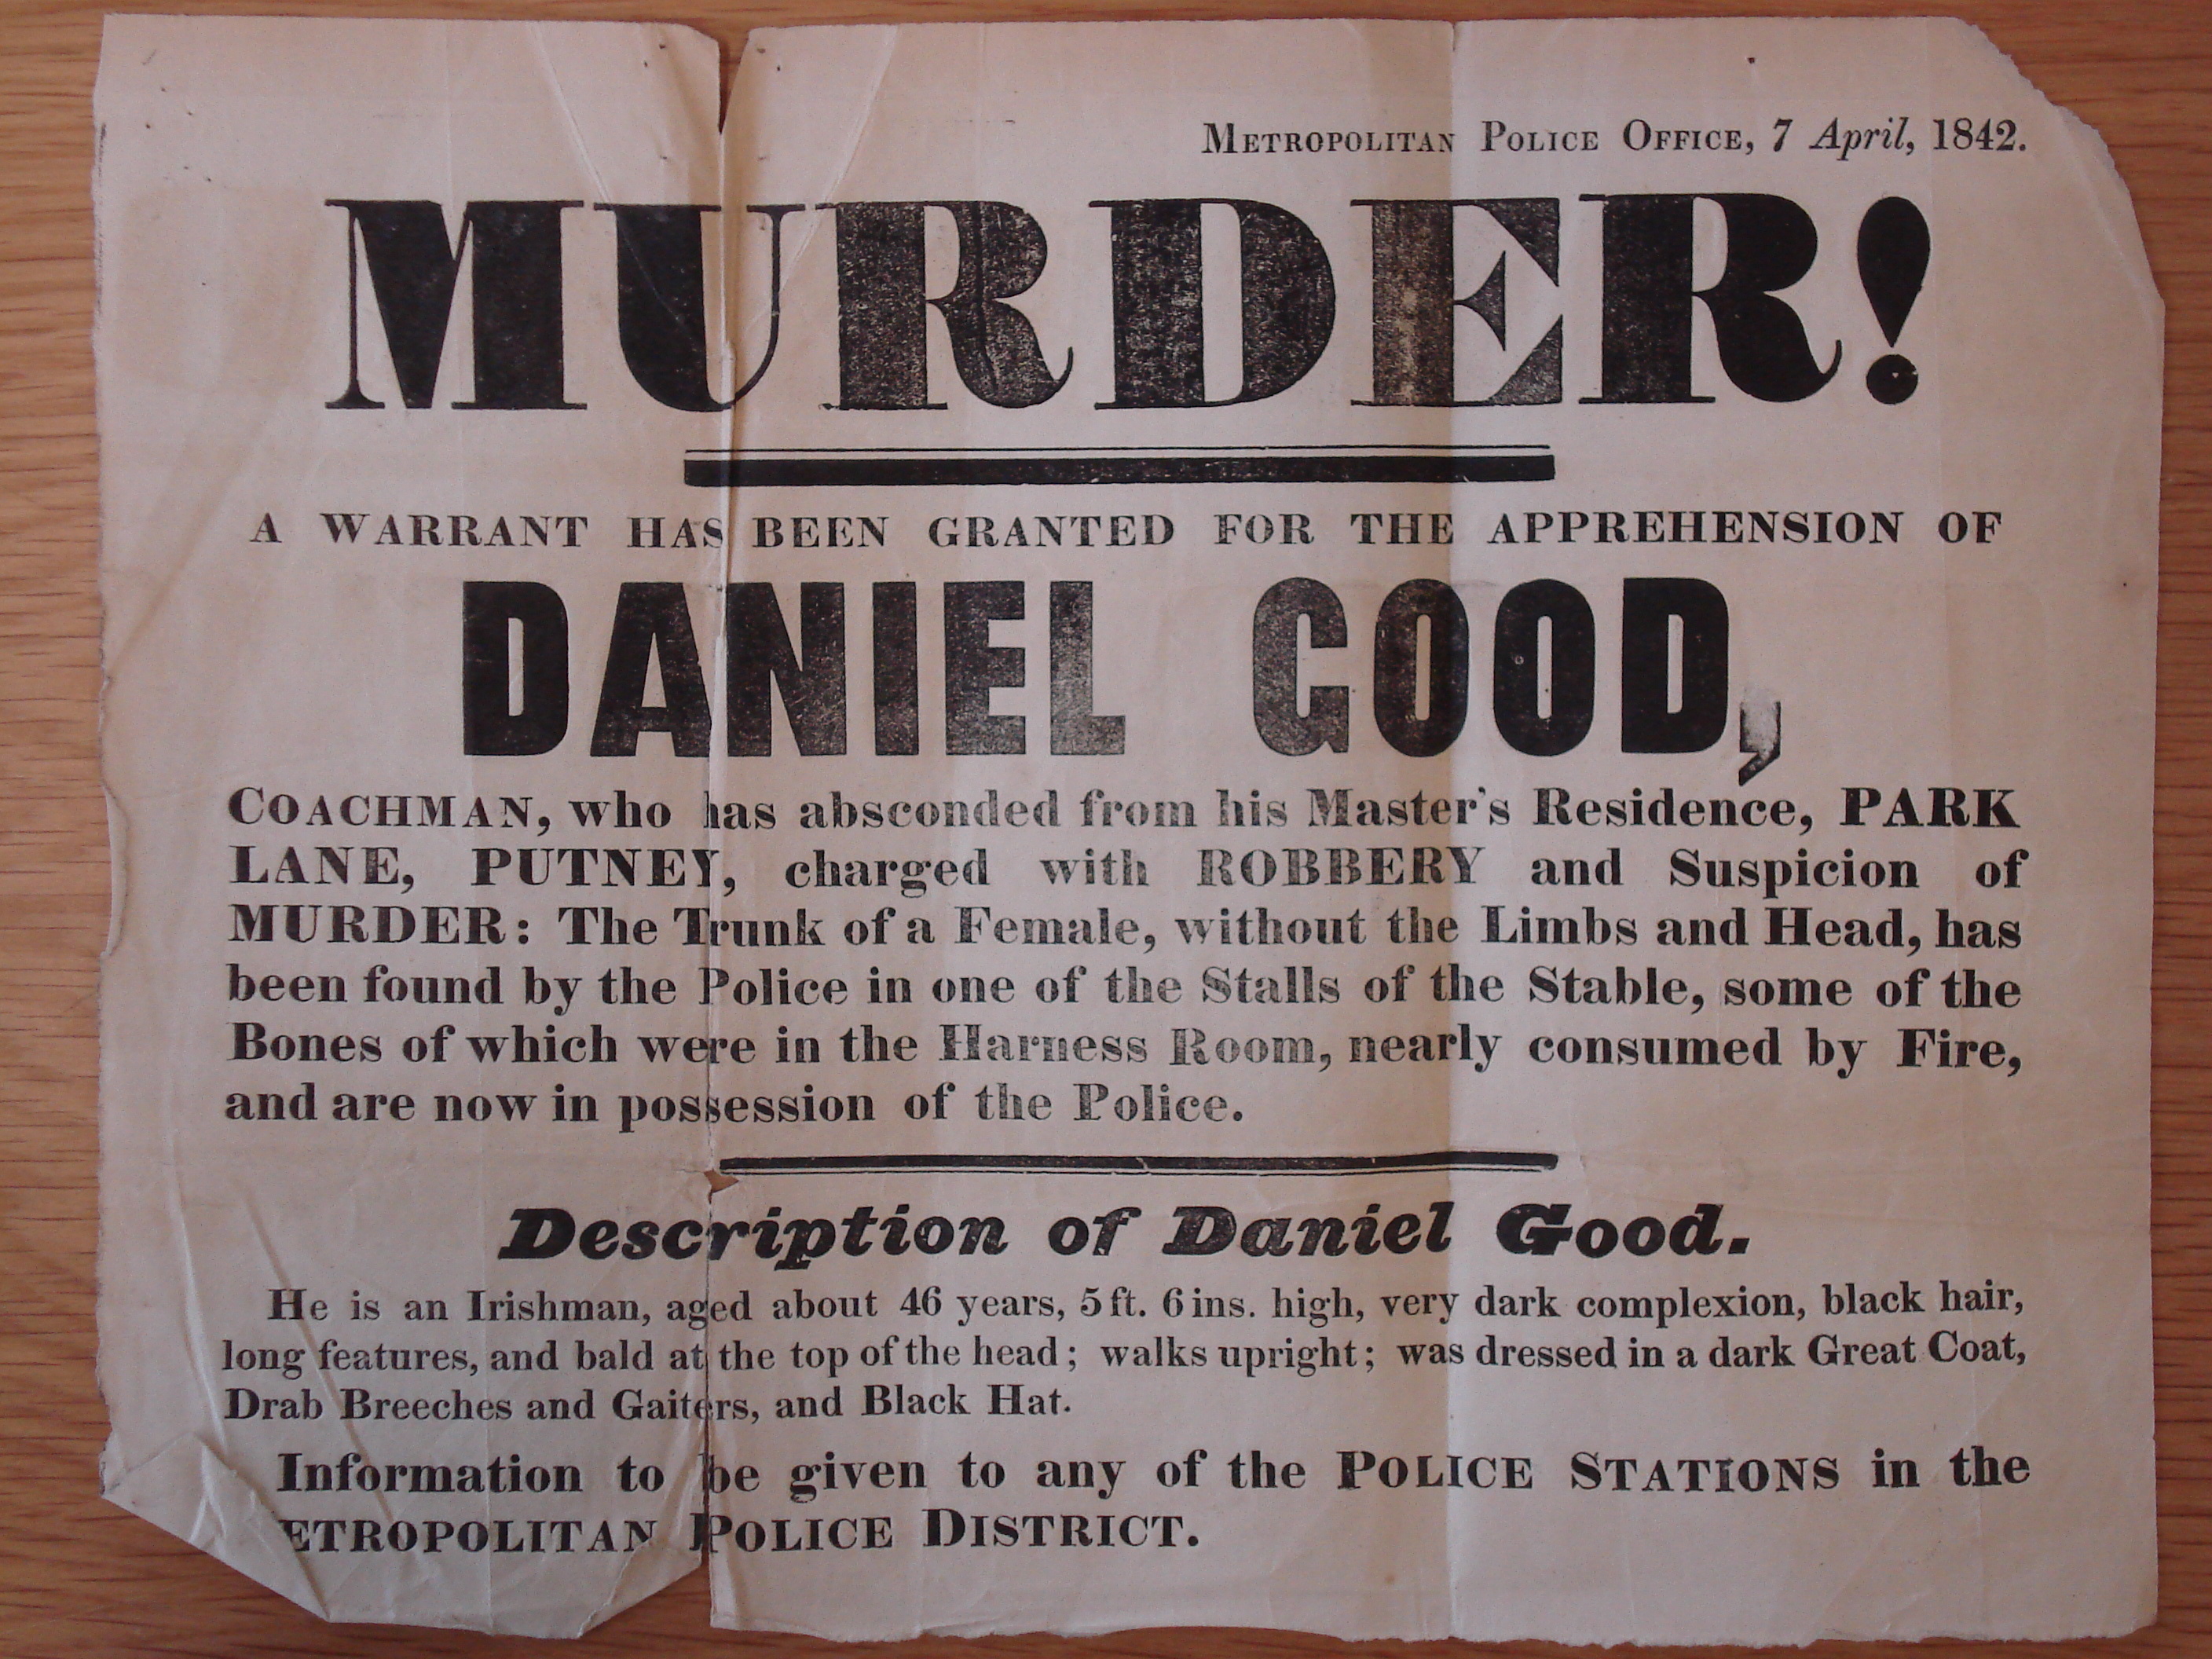 Watching the detectives: The arrest of the inappropriately-named Daniel Good.